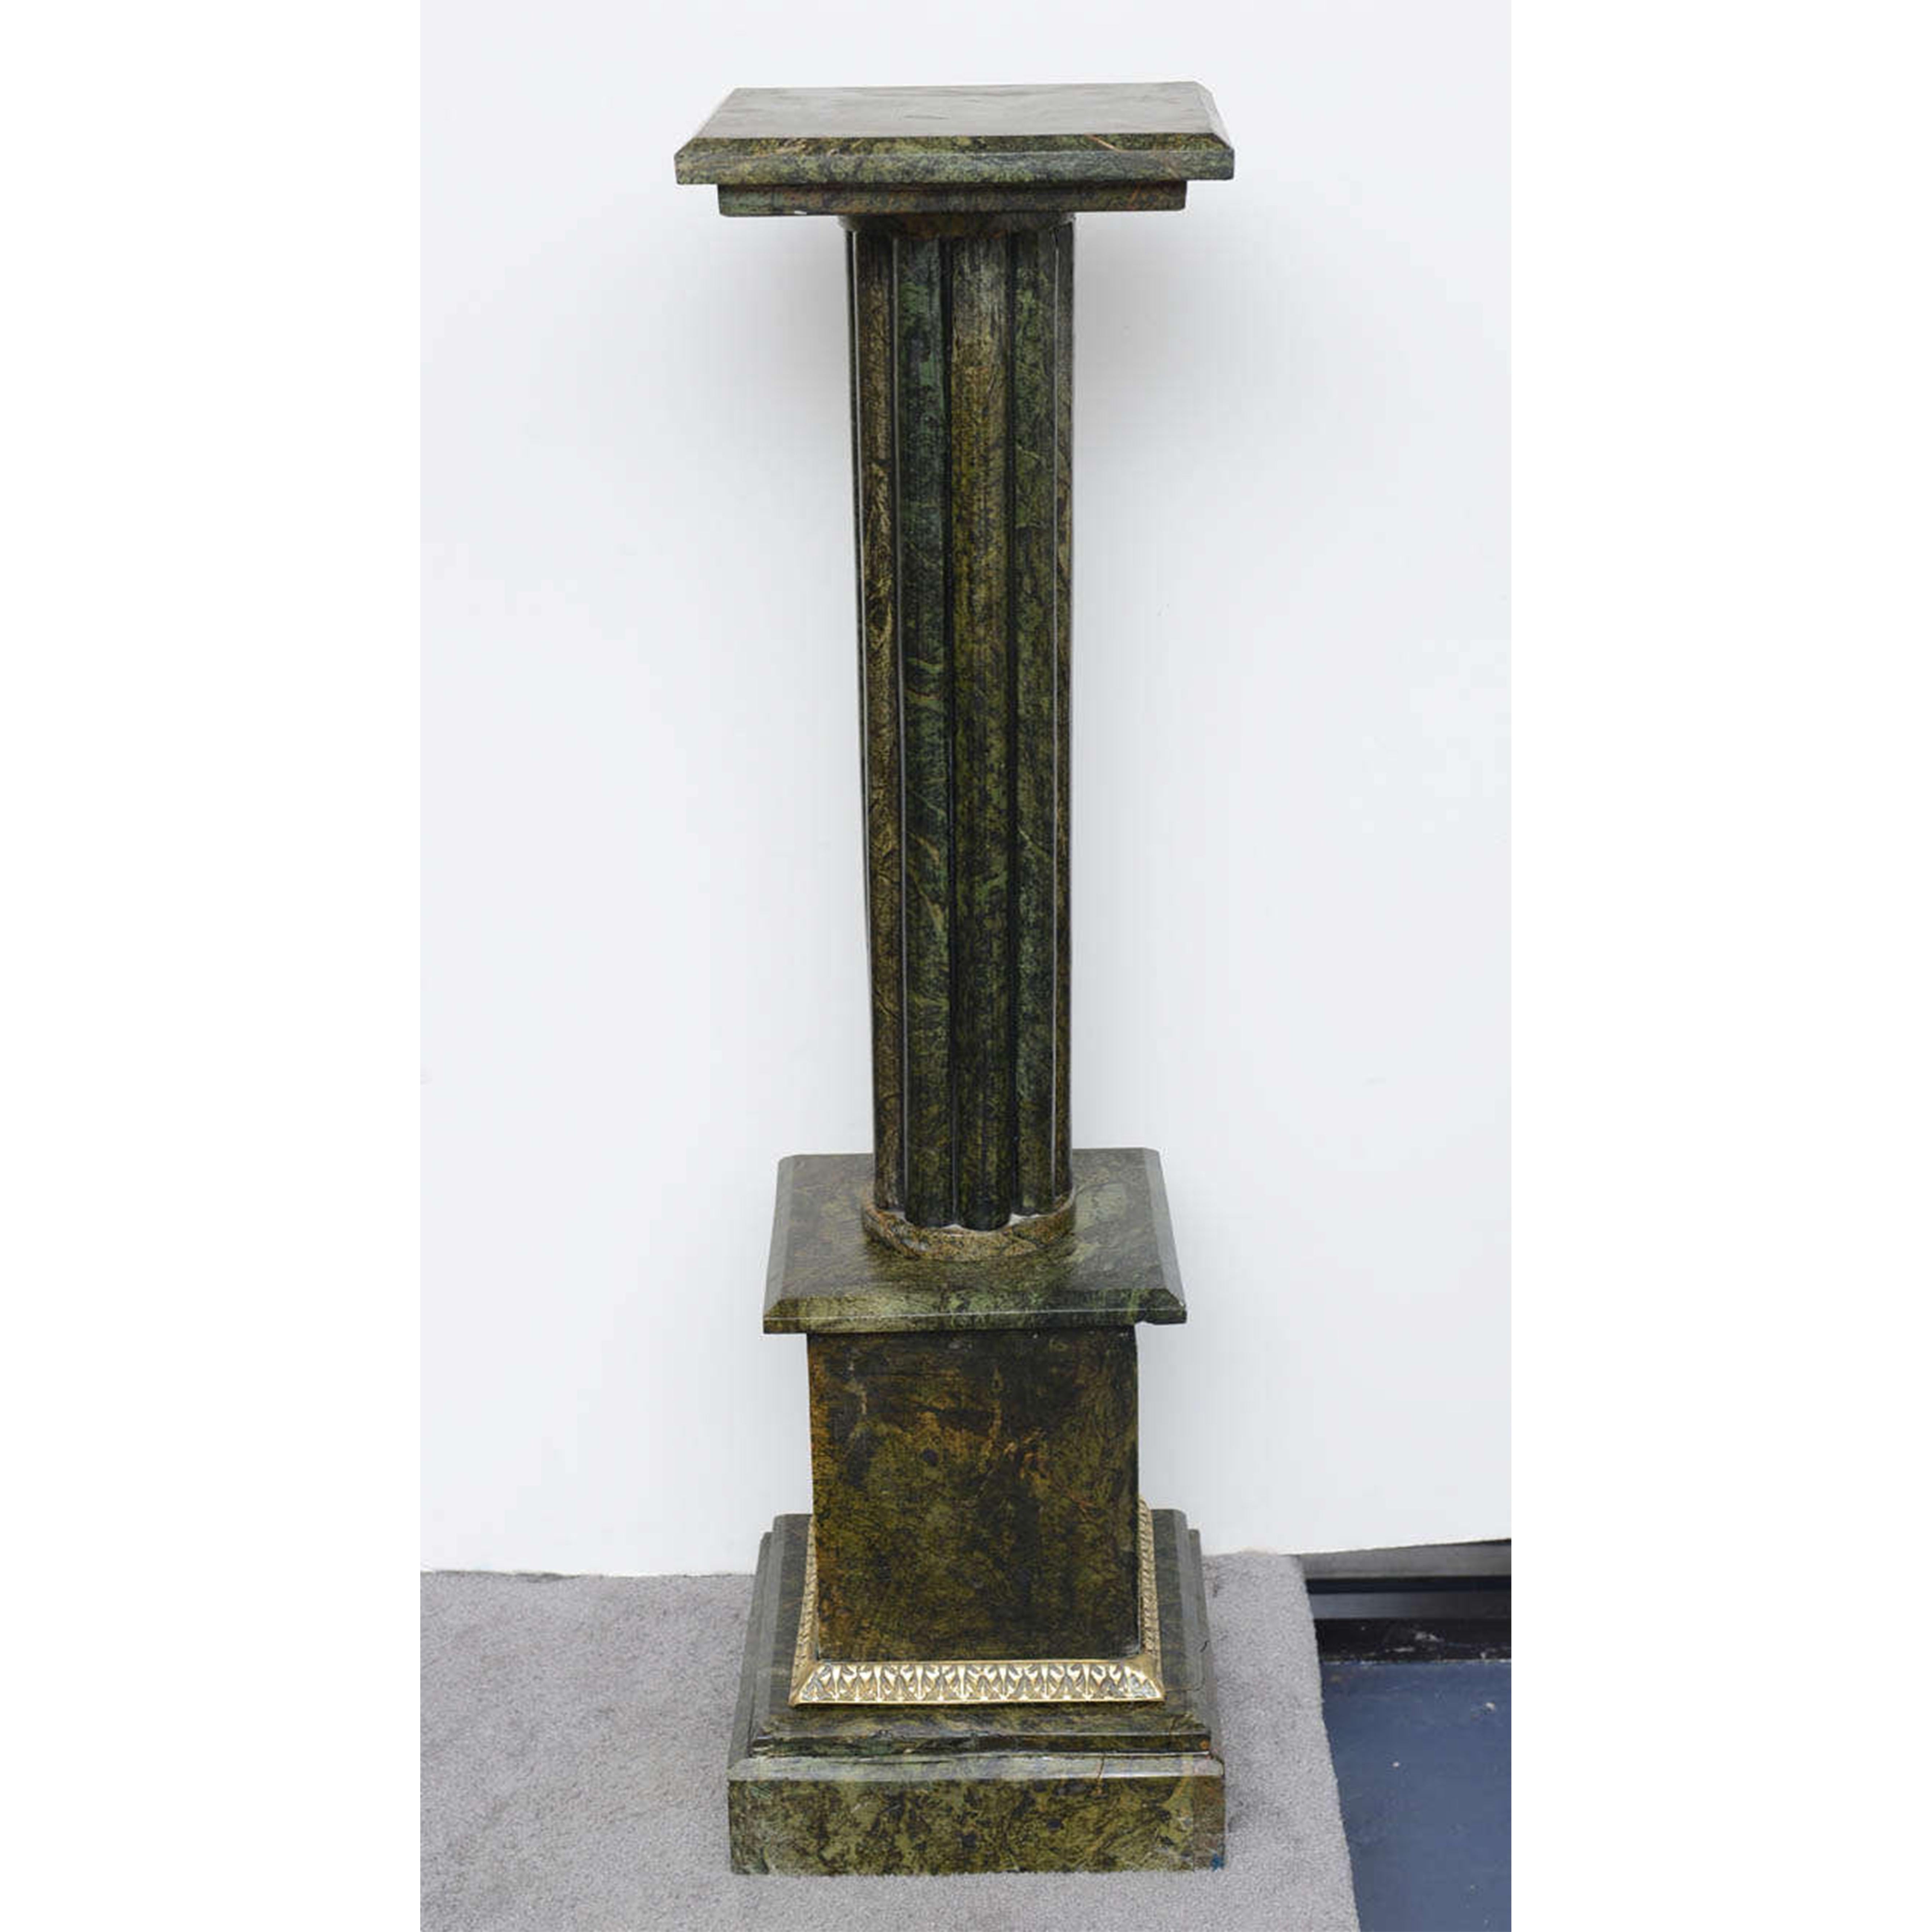 Marble pedestal .The middle part is made of 9 marble columns.
The square base is surlined with a golden bronze frame.